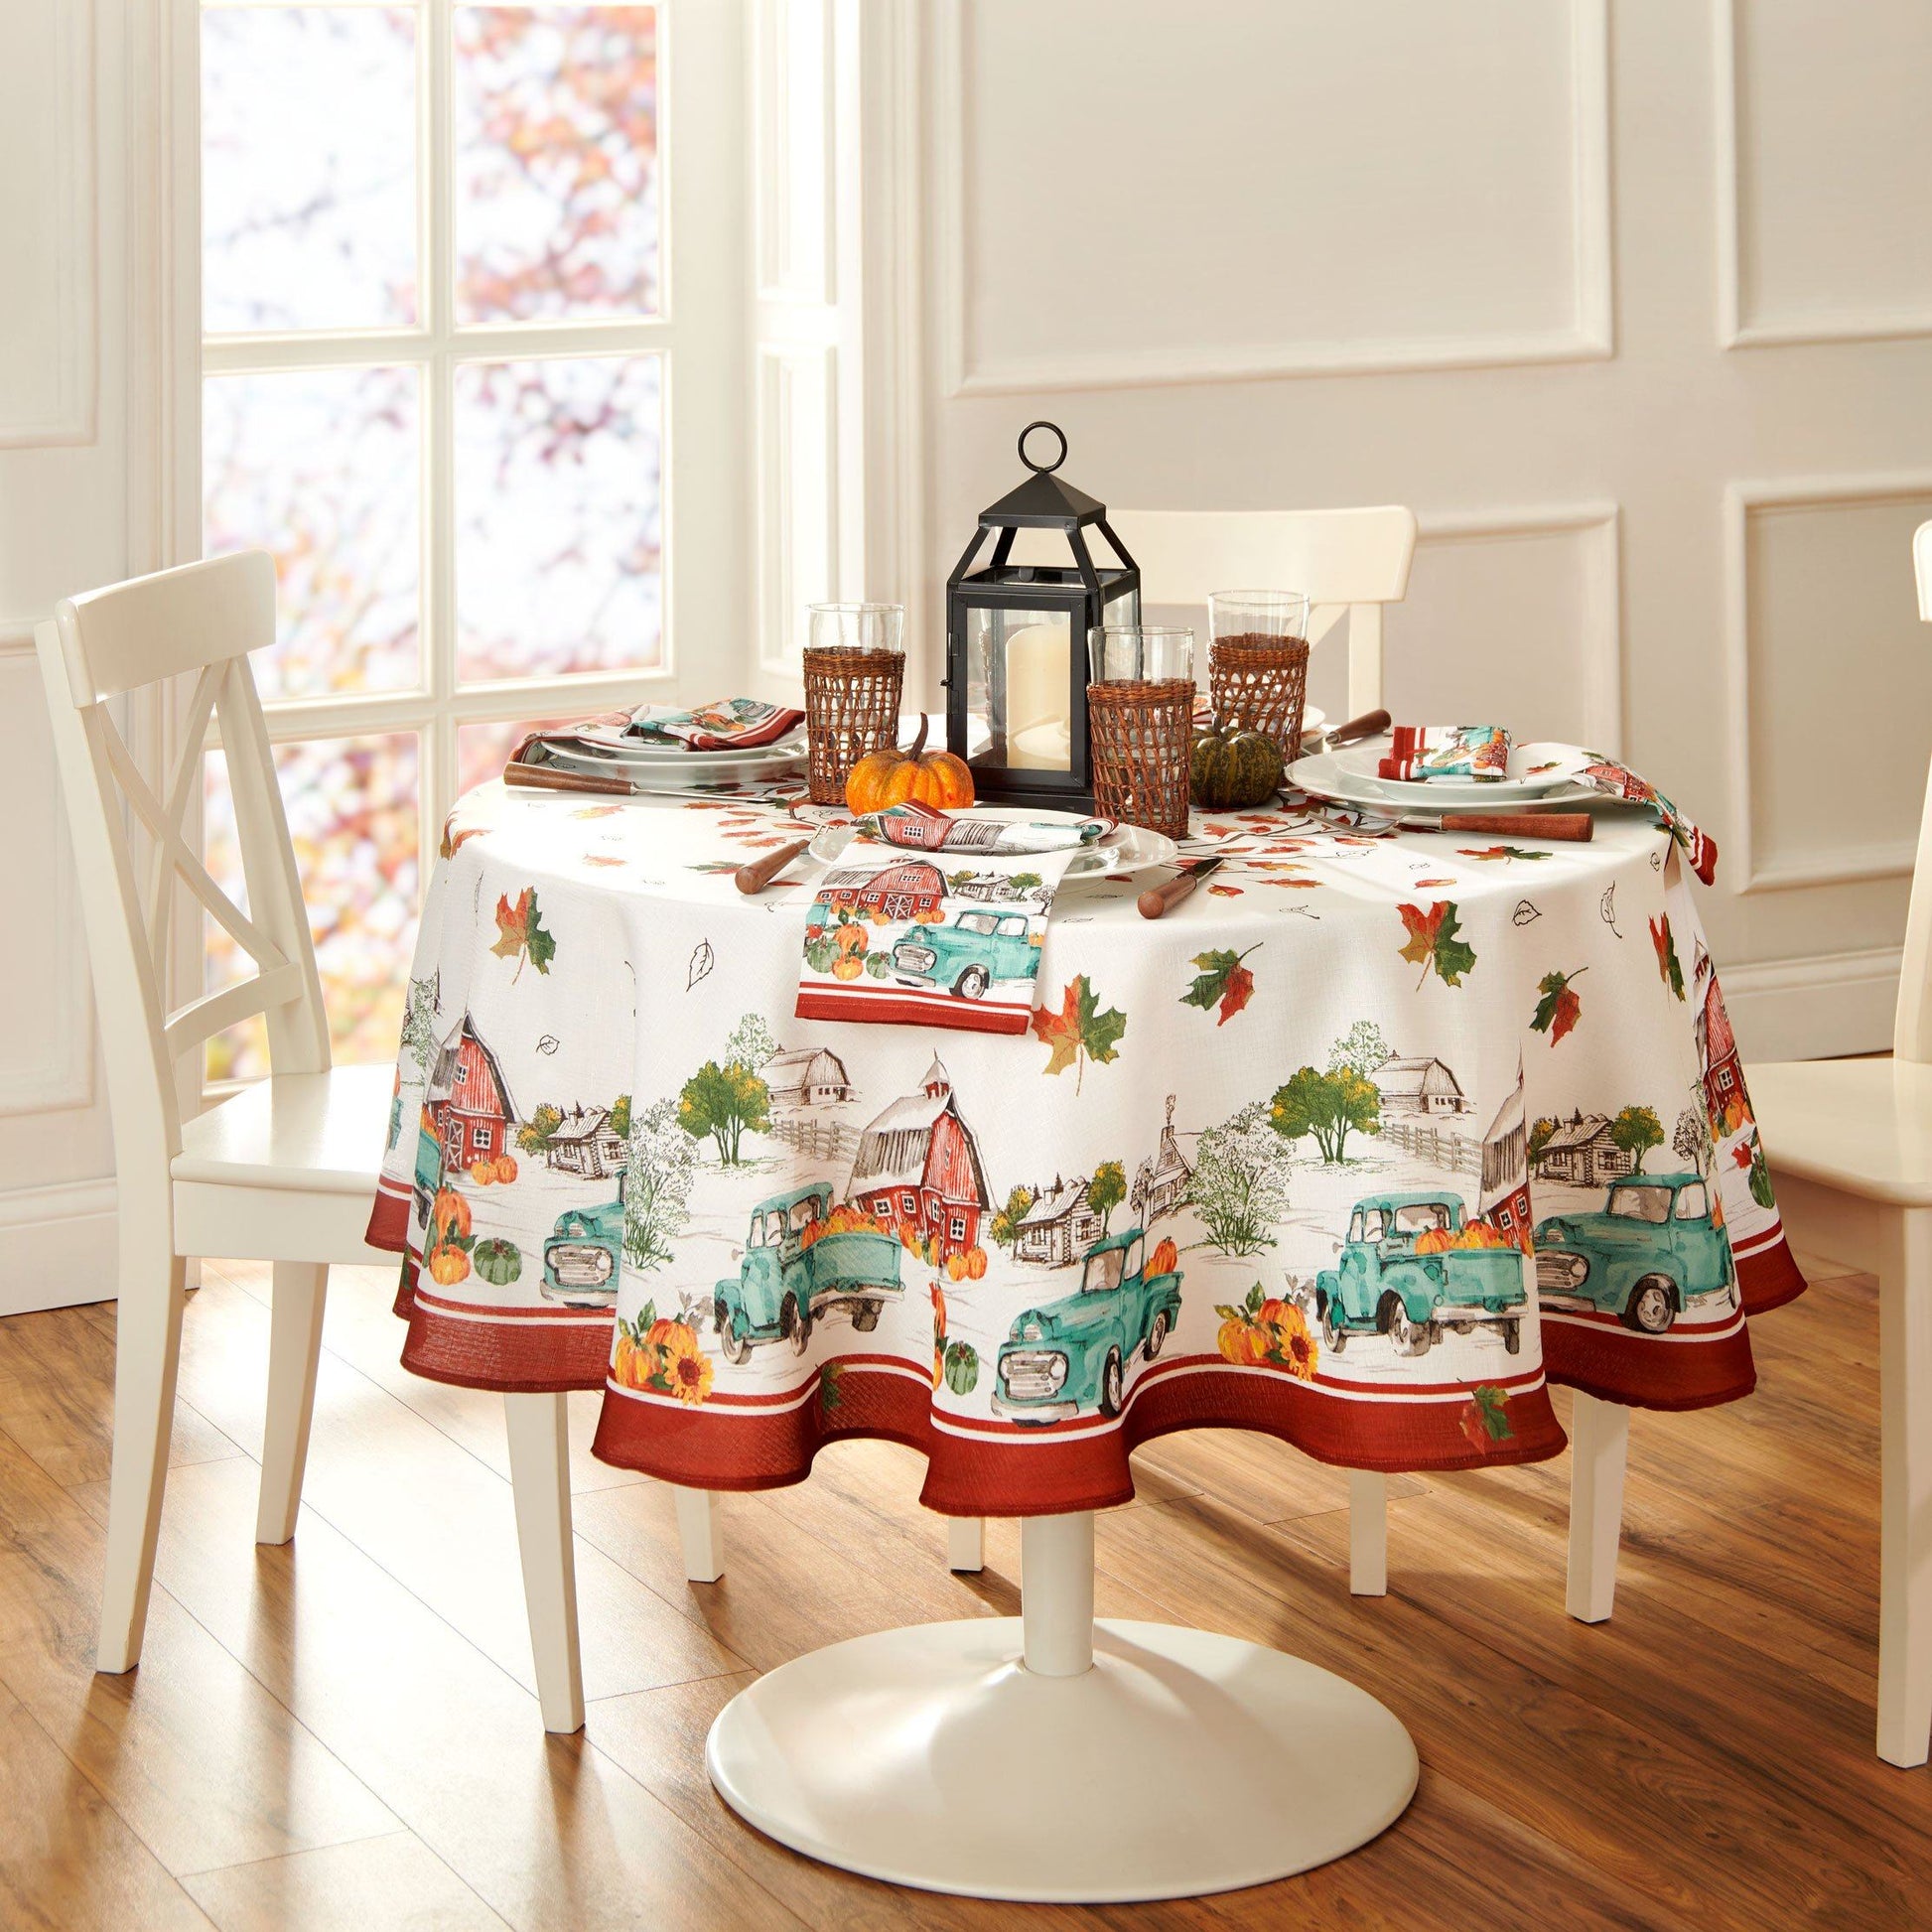 Blue farm truck, red barn and pumpkin boarder tablecloth with fall leaves center design